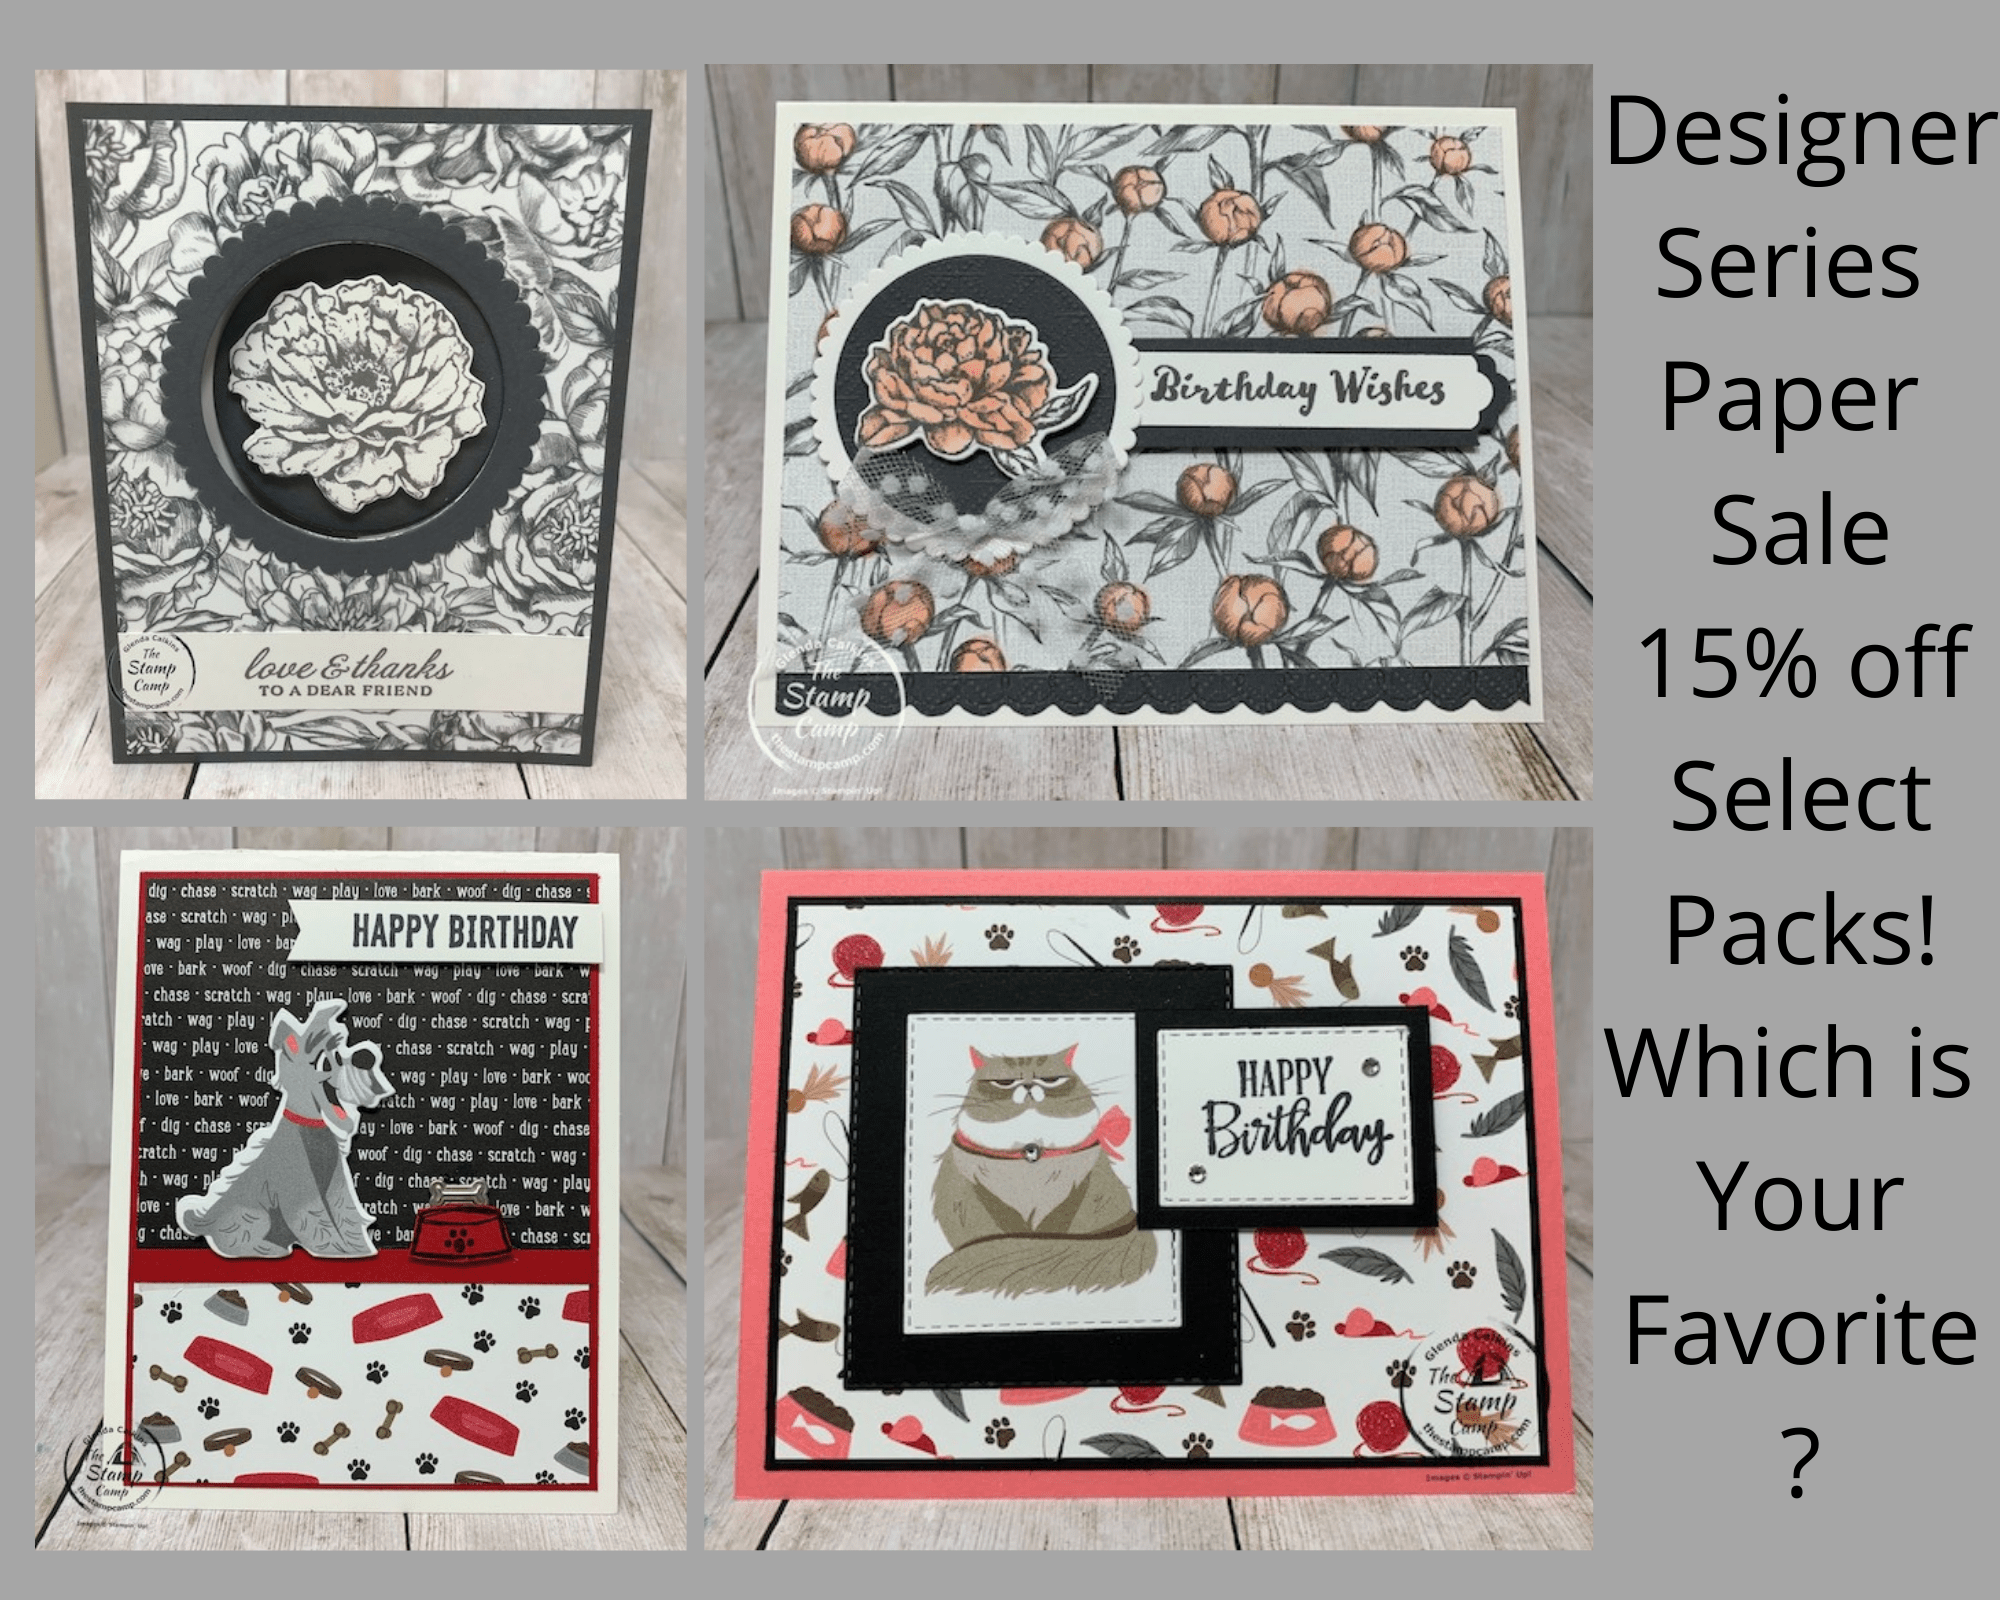 Designer Series Paper sale going on for the month of October 2020. During this sale you can get select Designer Series Paper packs at 15% off. See my blog here for the details: https://wp.me/p59VWq-bvs. #stampinup #designerpaper #thestampcamp